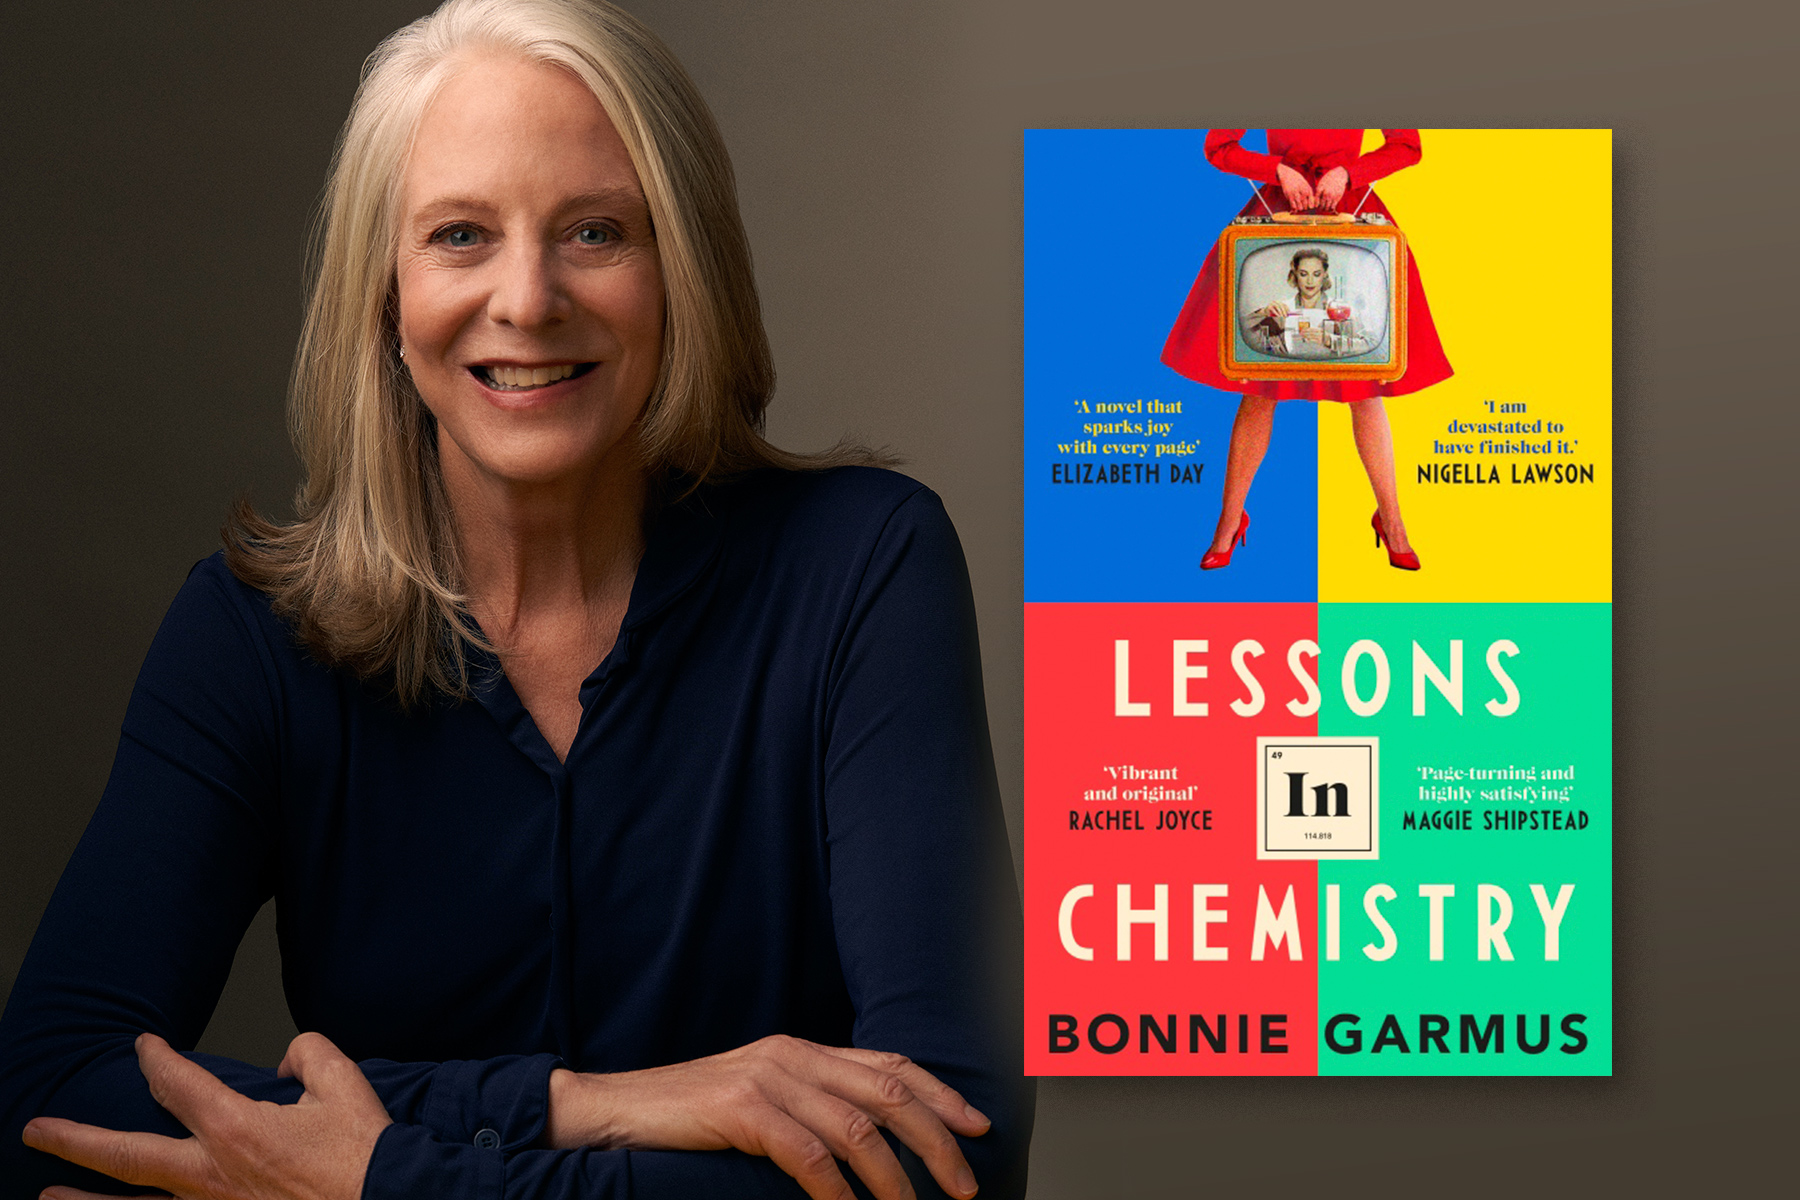 Image of Bonnie Garmus next to a cover of her book Lessons in Chemistry